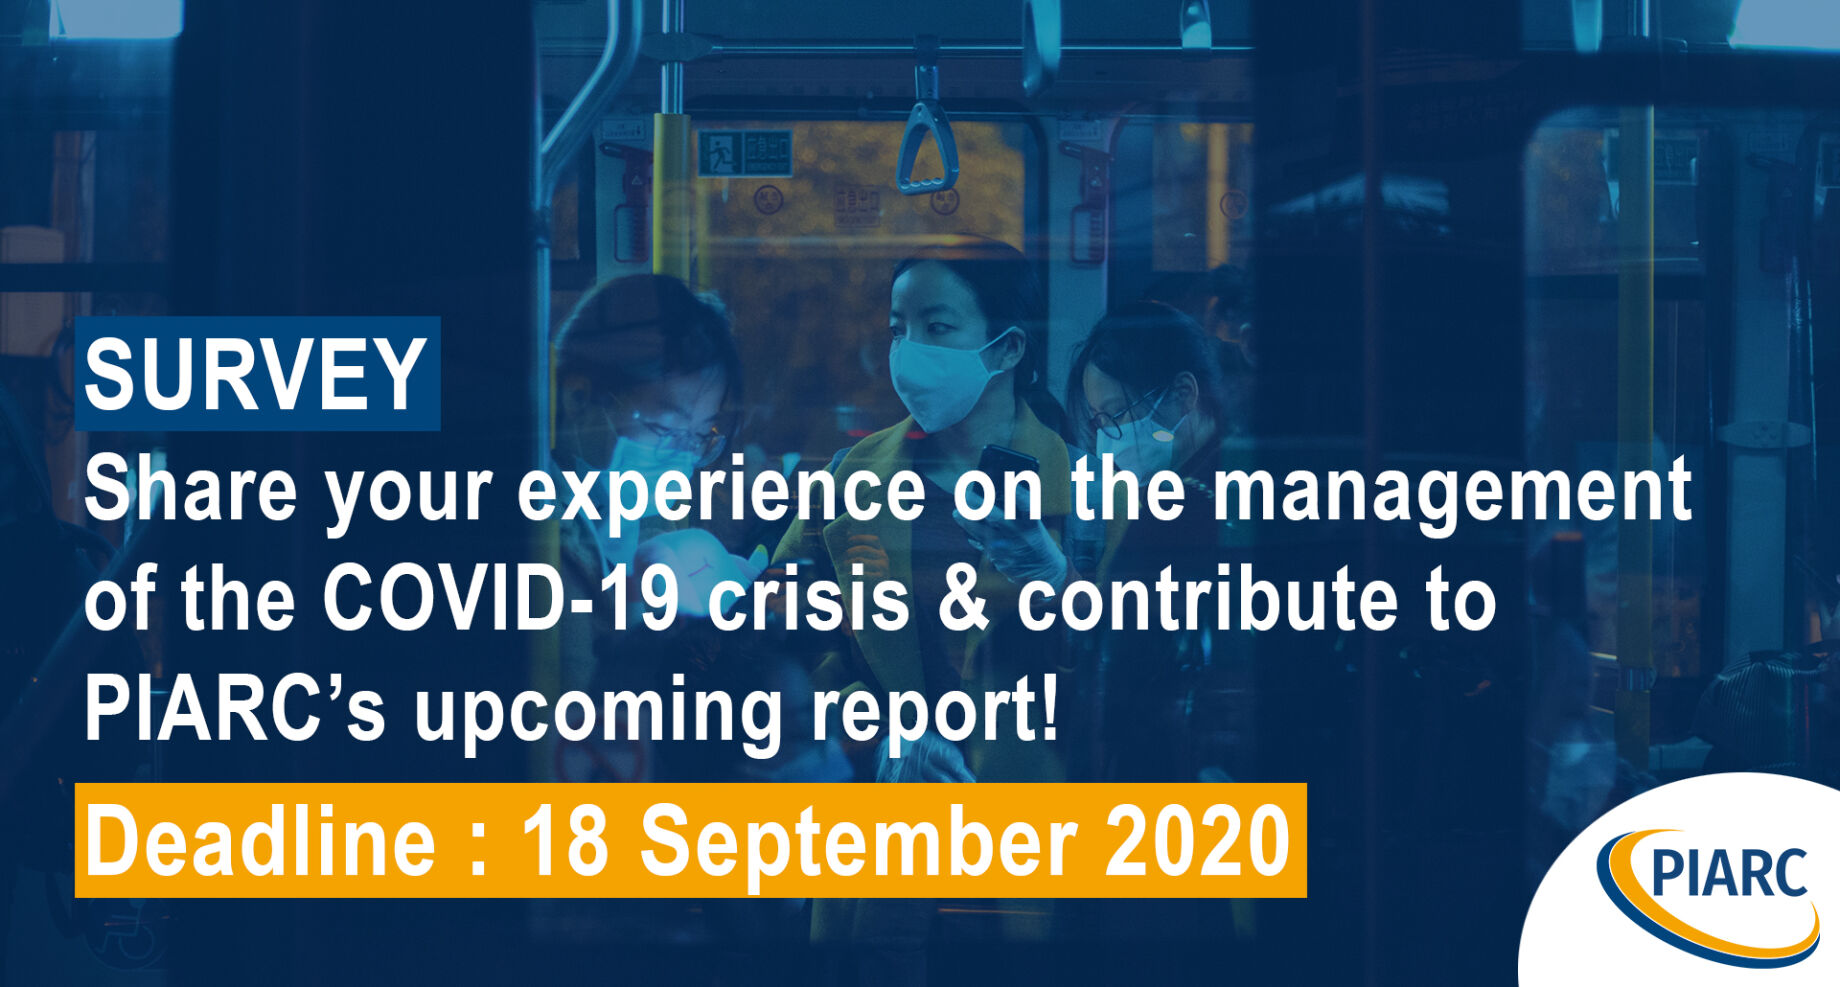 You have until 18 September to answer the COVID-19 crisis management survey!